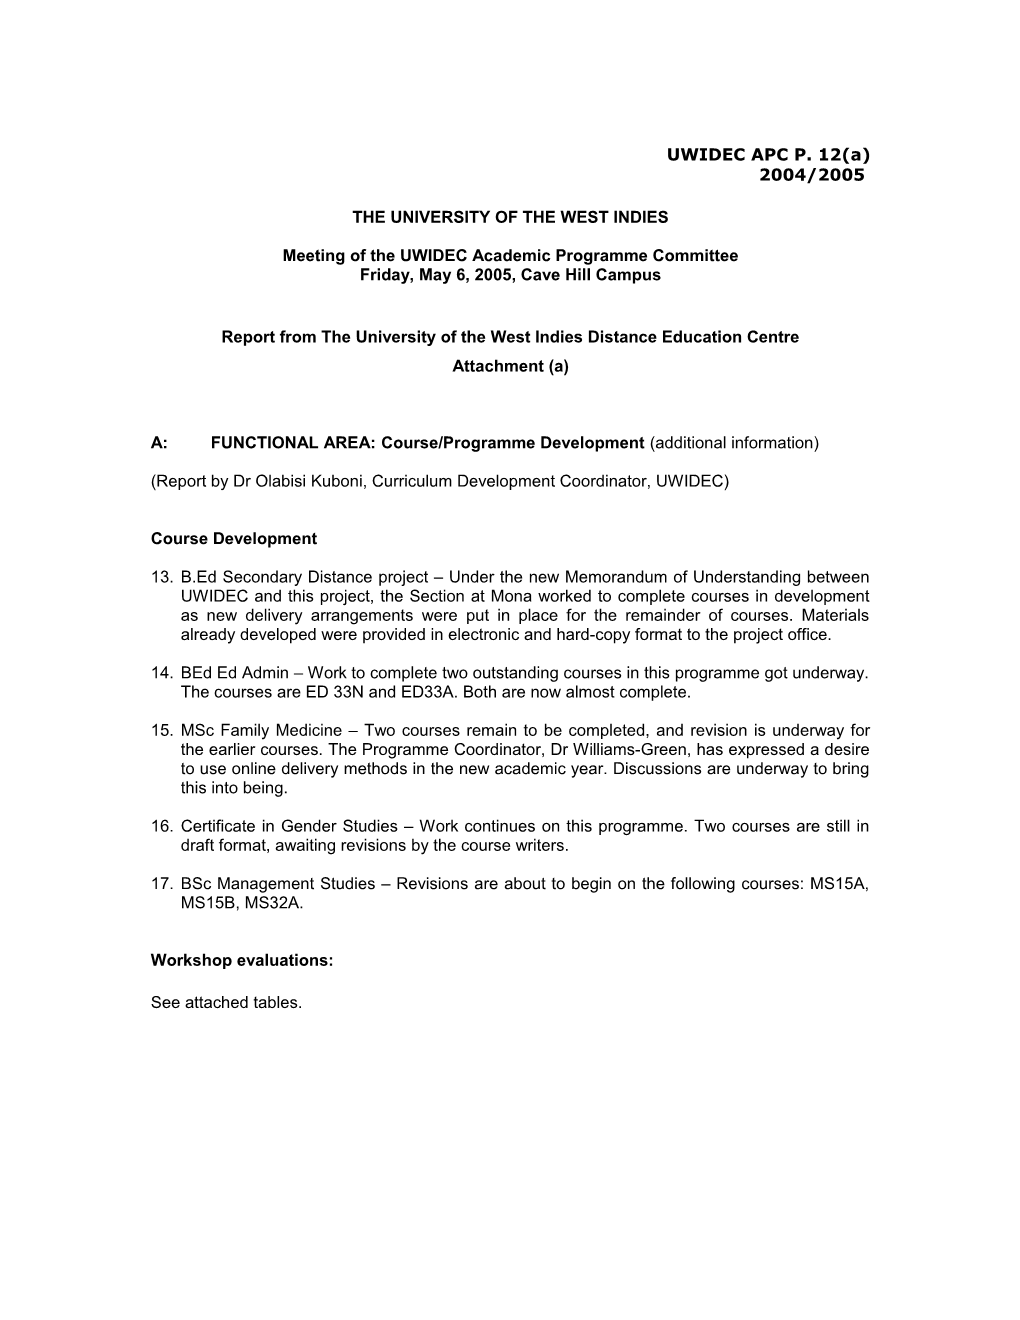 Report on the Activities of the Curriculum Development Section, July 2004 to July April 2005